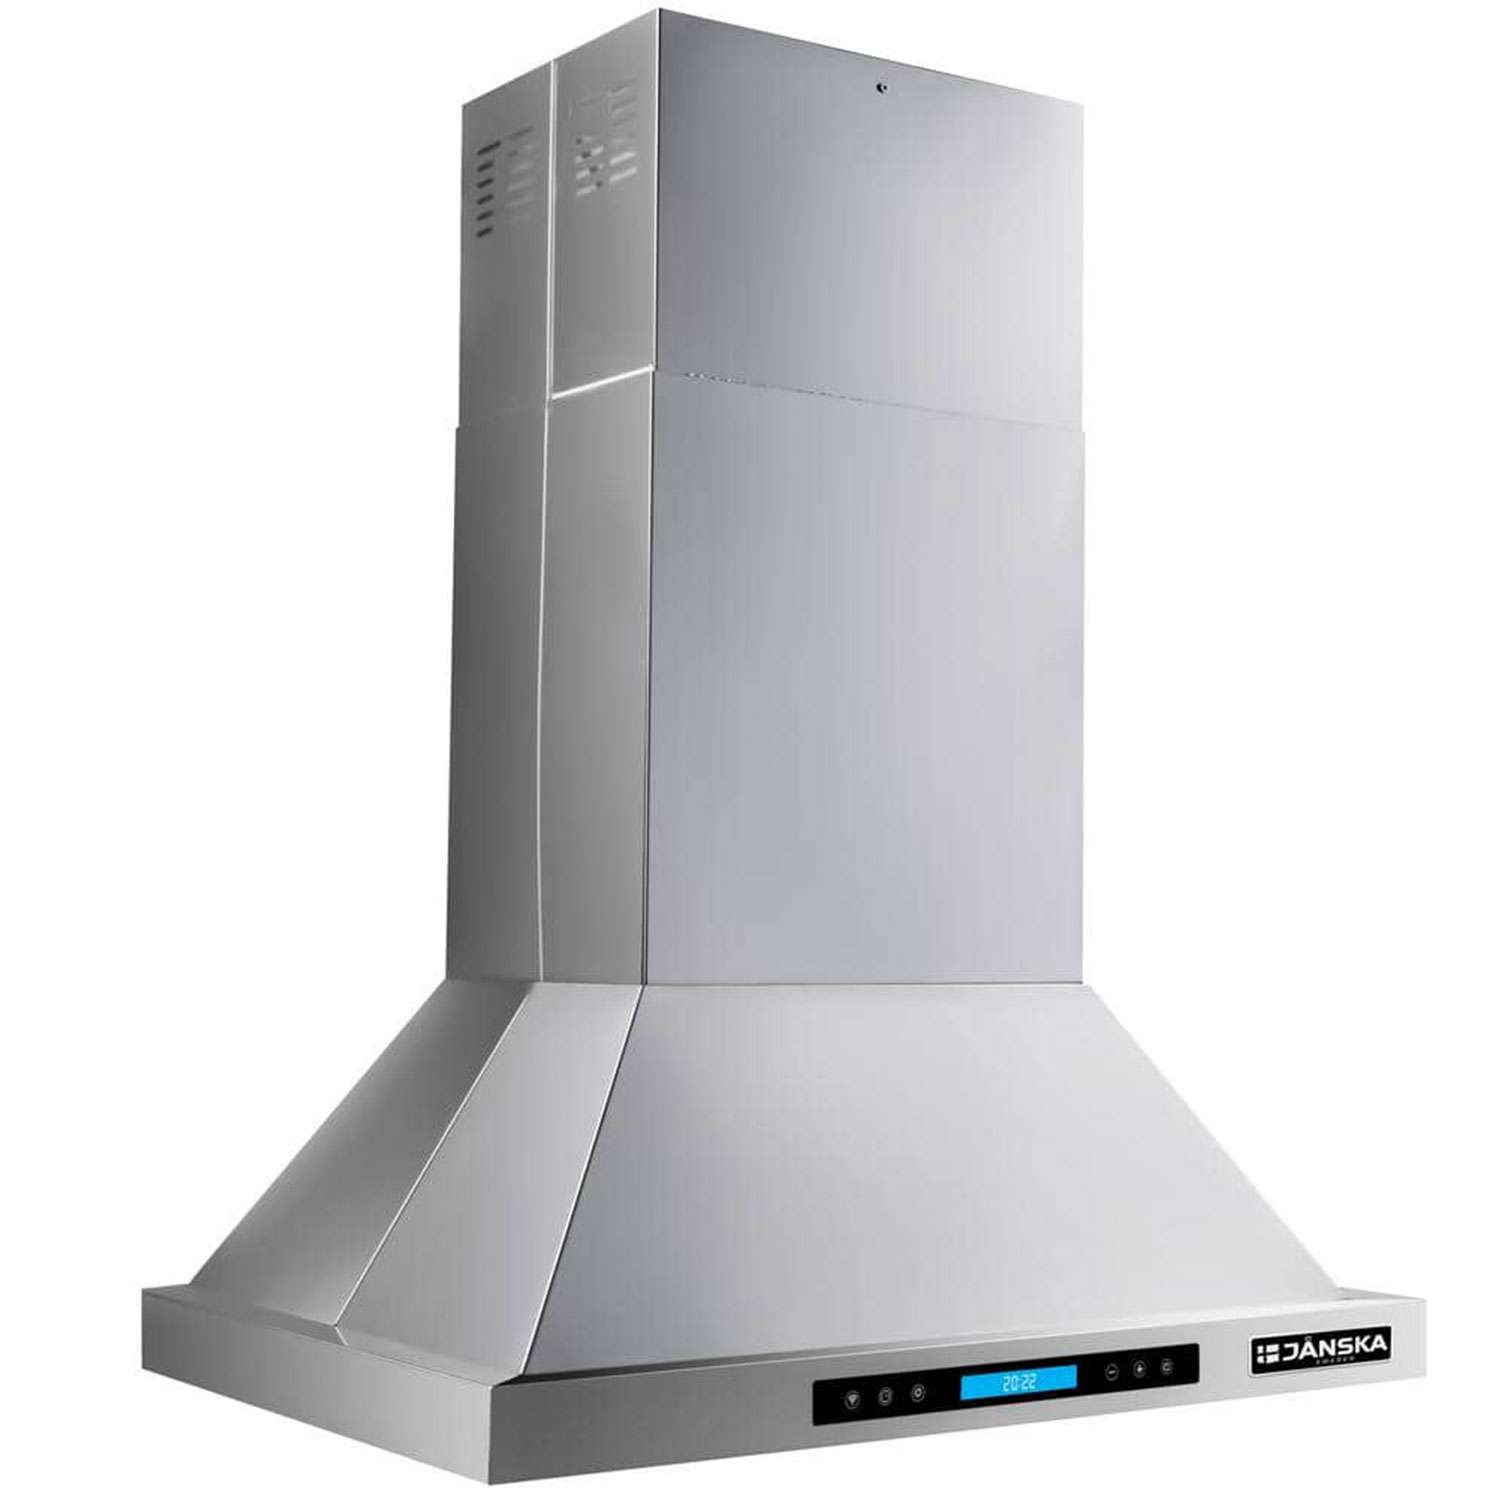 30-in.-850-CFM-Ducted-Island-Mount-Range-Hood-in-Stainless-Steel-with-Touch-Display-LED-Lights-and-Permanent-Filters-1